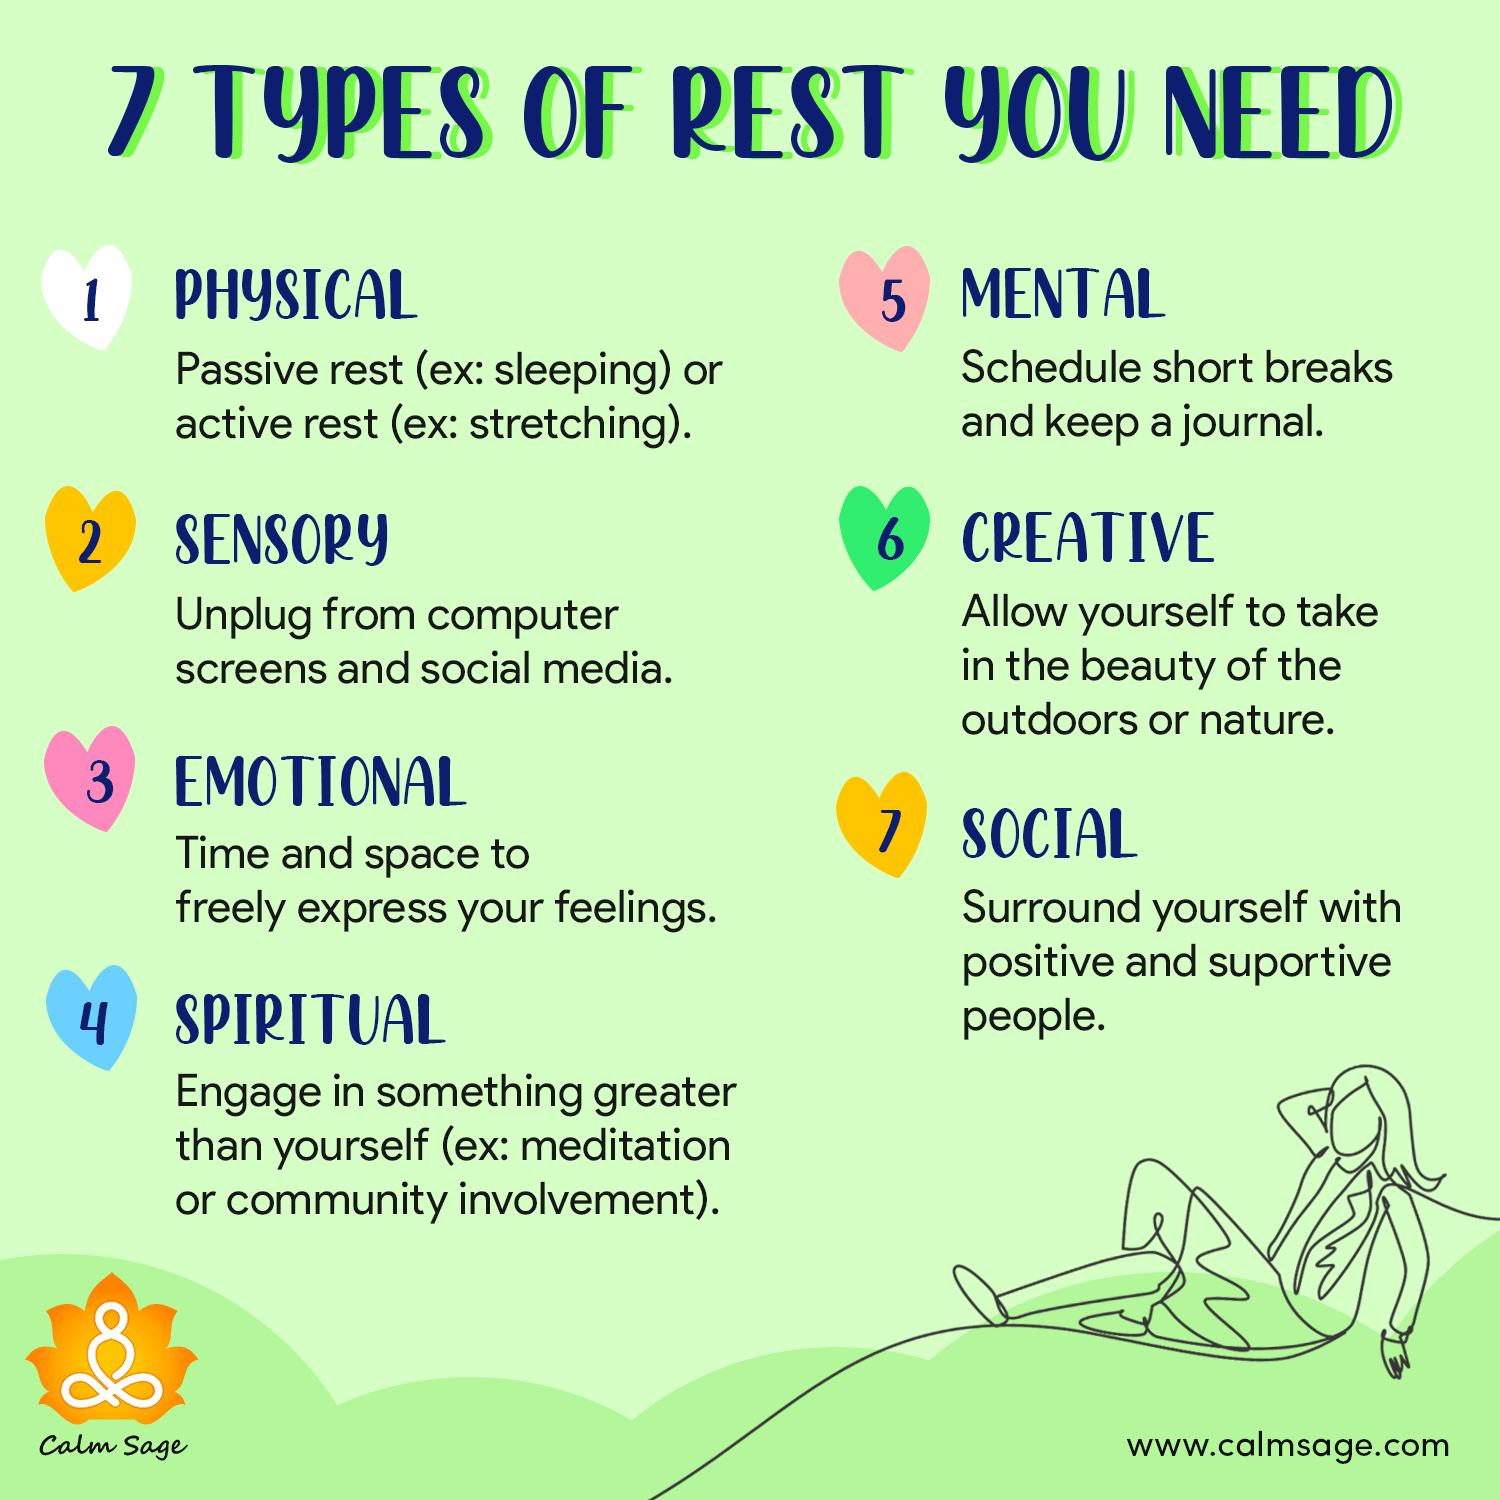 7 Types of Rest You Need